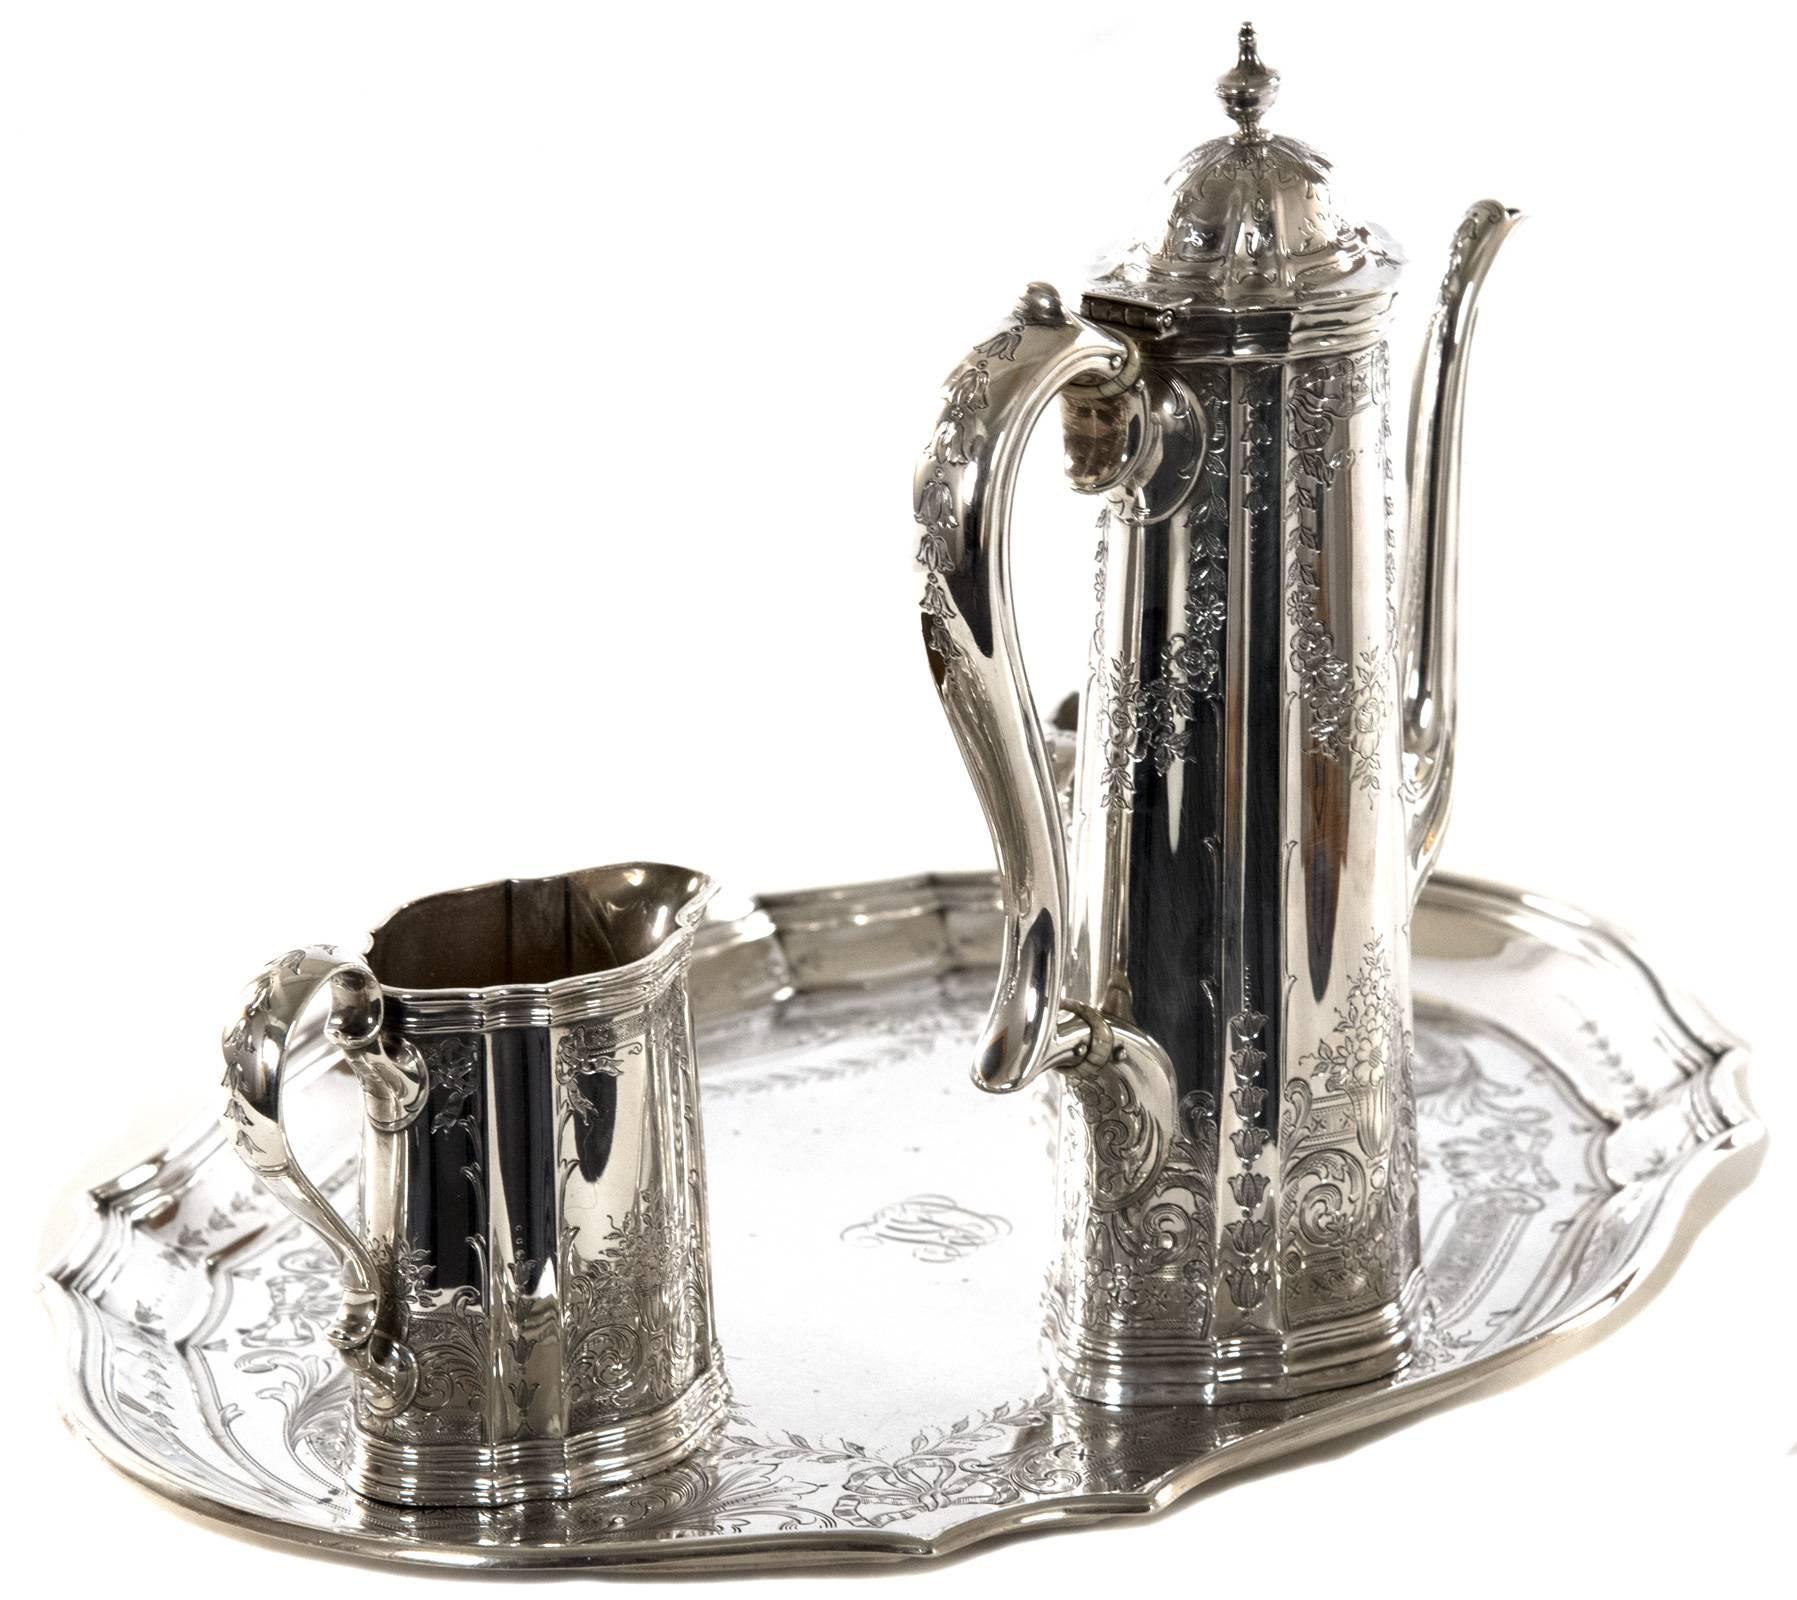 An early 20th century, circa 1092-1907, four-piece Tiffany & Co. sterling silver coffee service comprised of a scalloped edge serving tray, coffeepot, creamer and sugar bowl. The elongated and panelled body of each piece is hand-hammered and chased